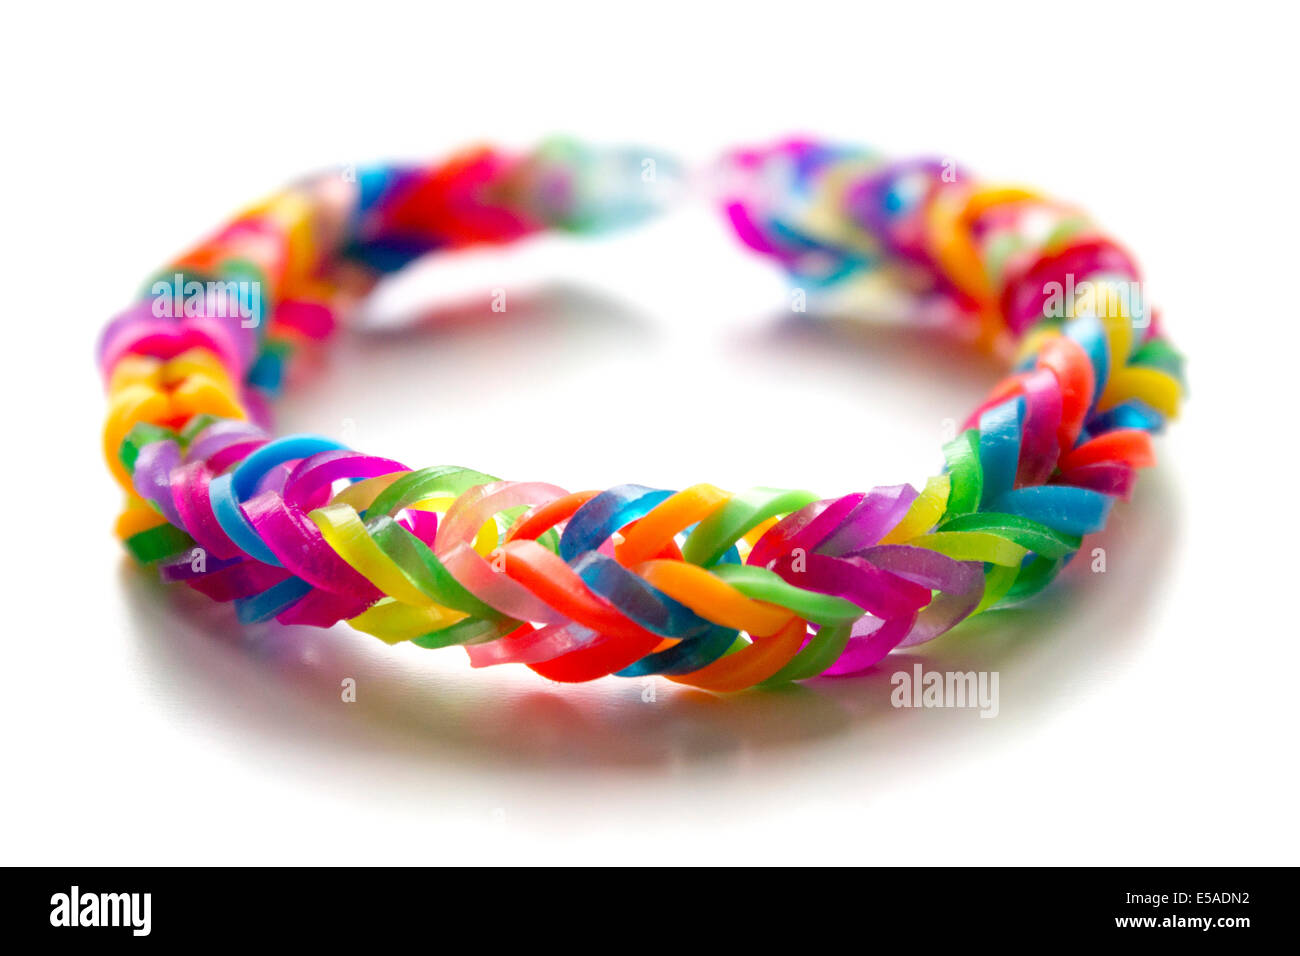 Rubber band bracelet in fish tail style Stock Photo - Alamy